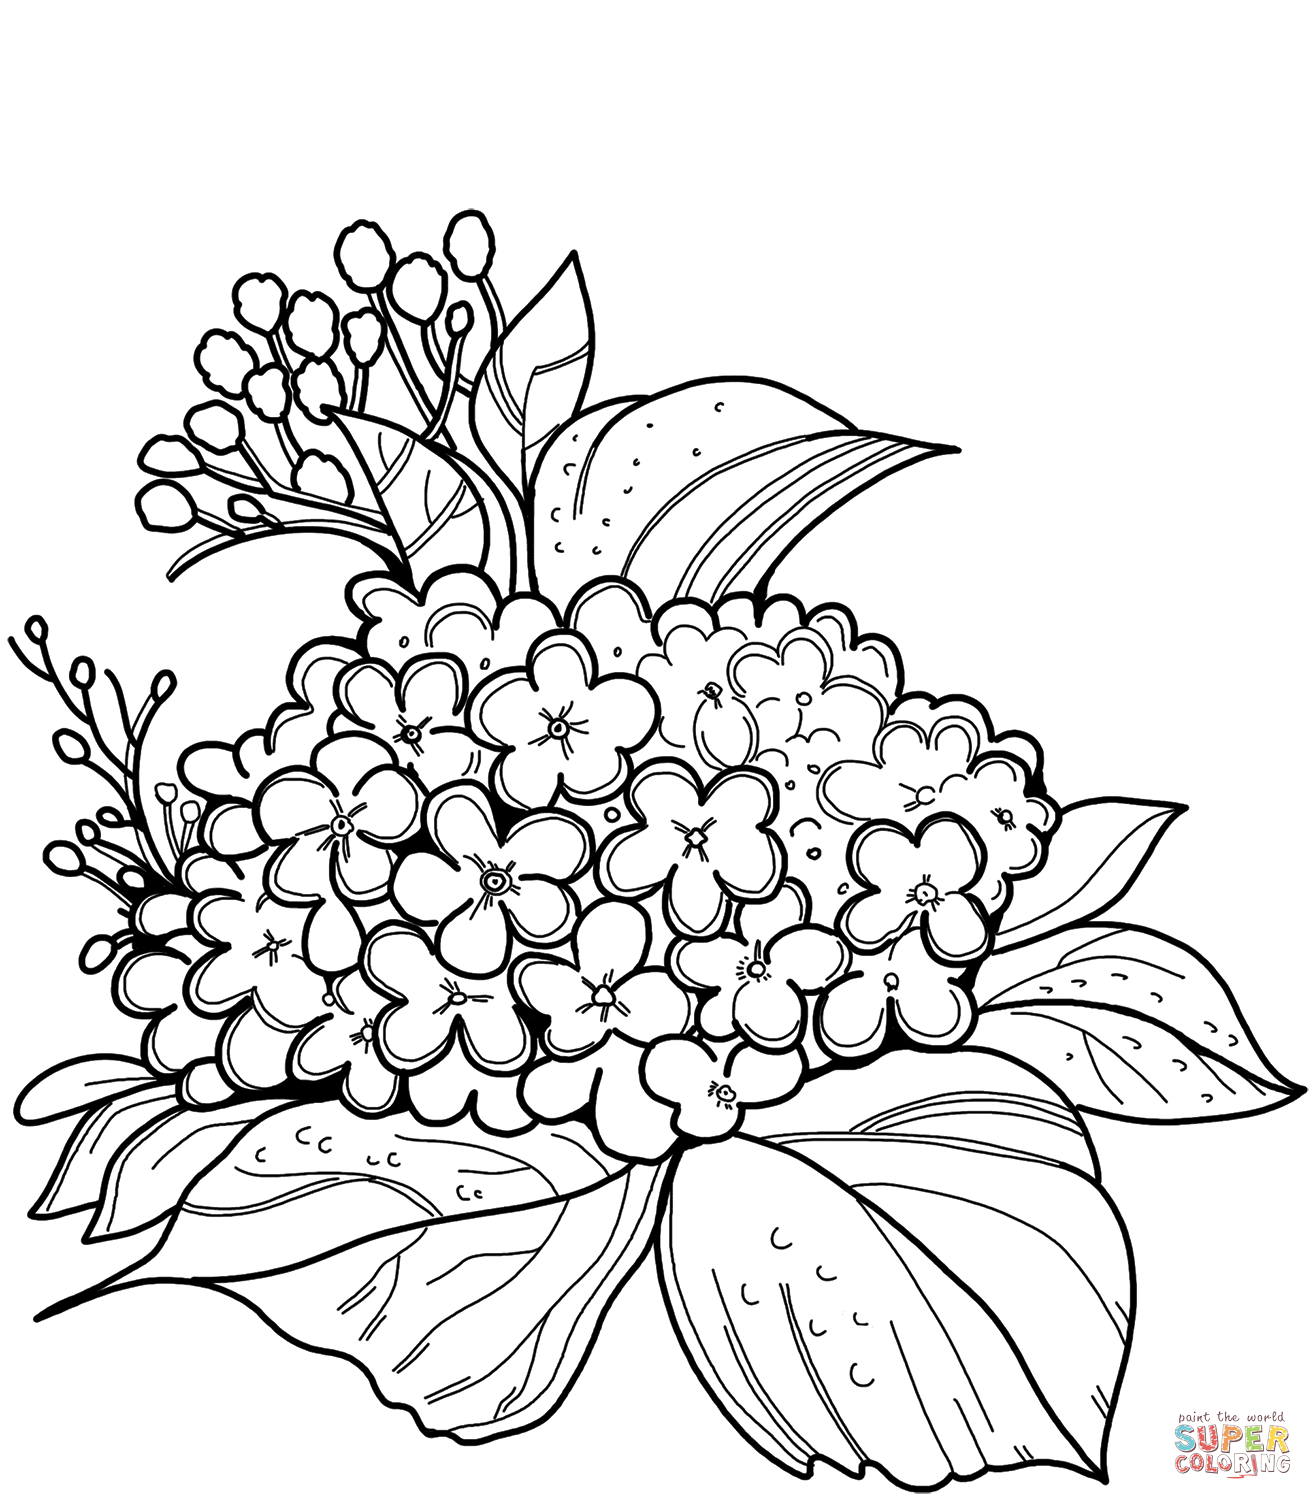 Hydrangea coloring page | Free Printable Coloring Pages